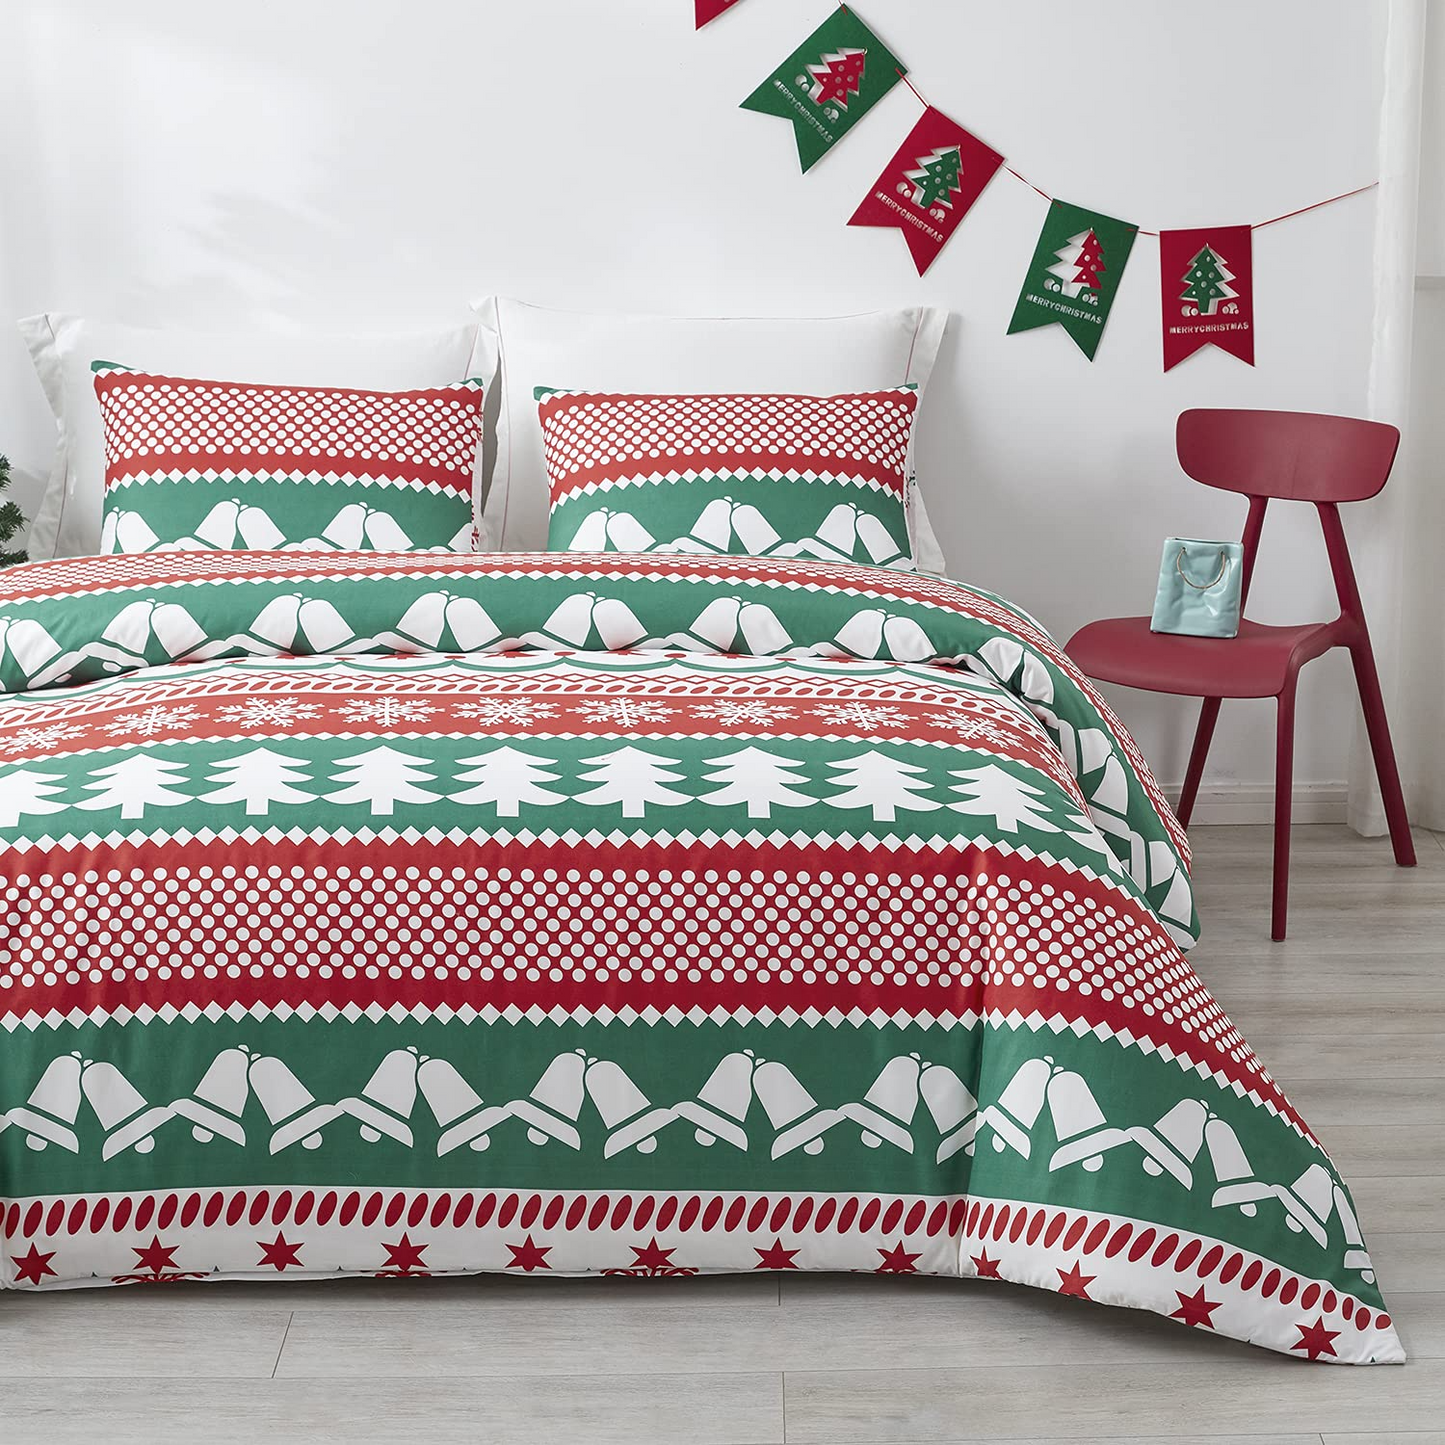 WONGS BEDDING Green With Christmas Elements Duvet Cover Set With 2 Pillowcases